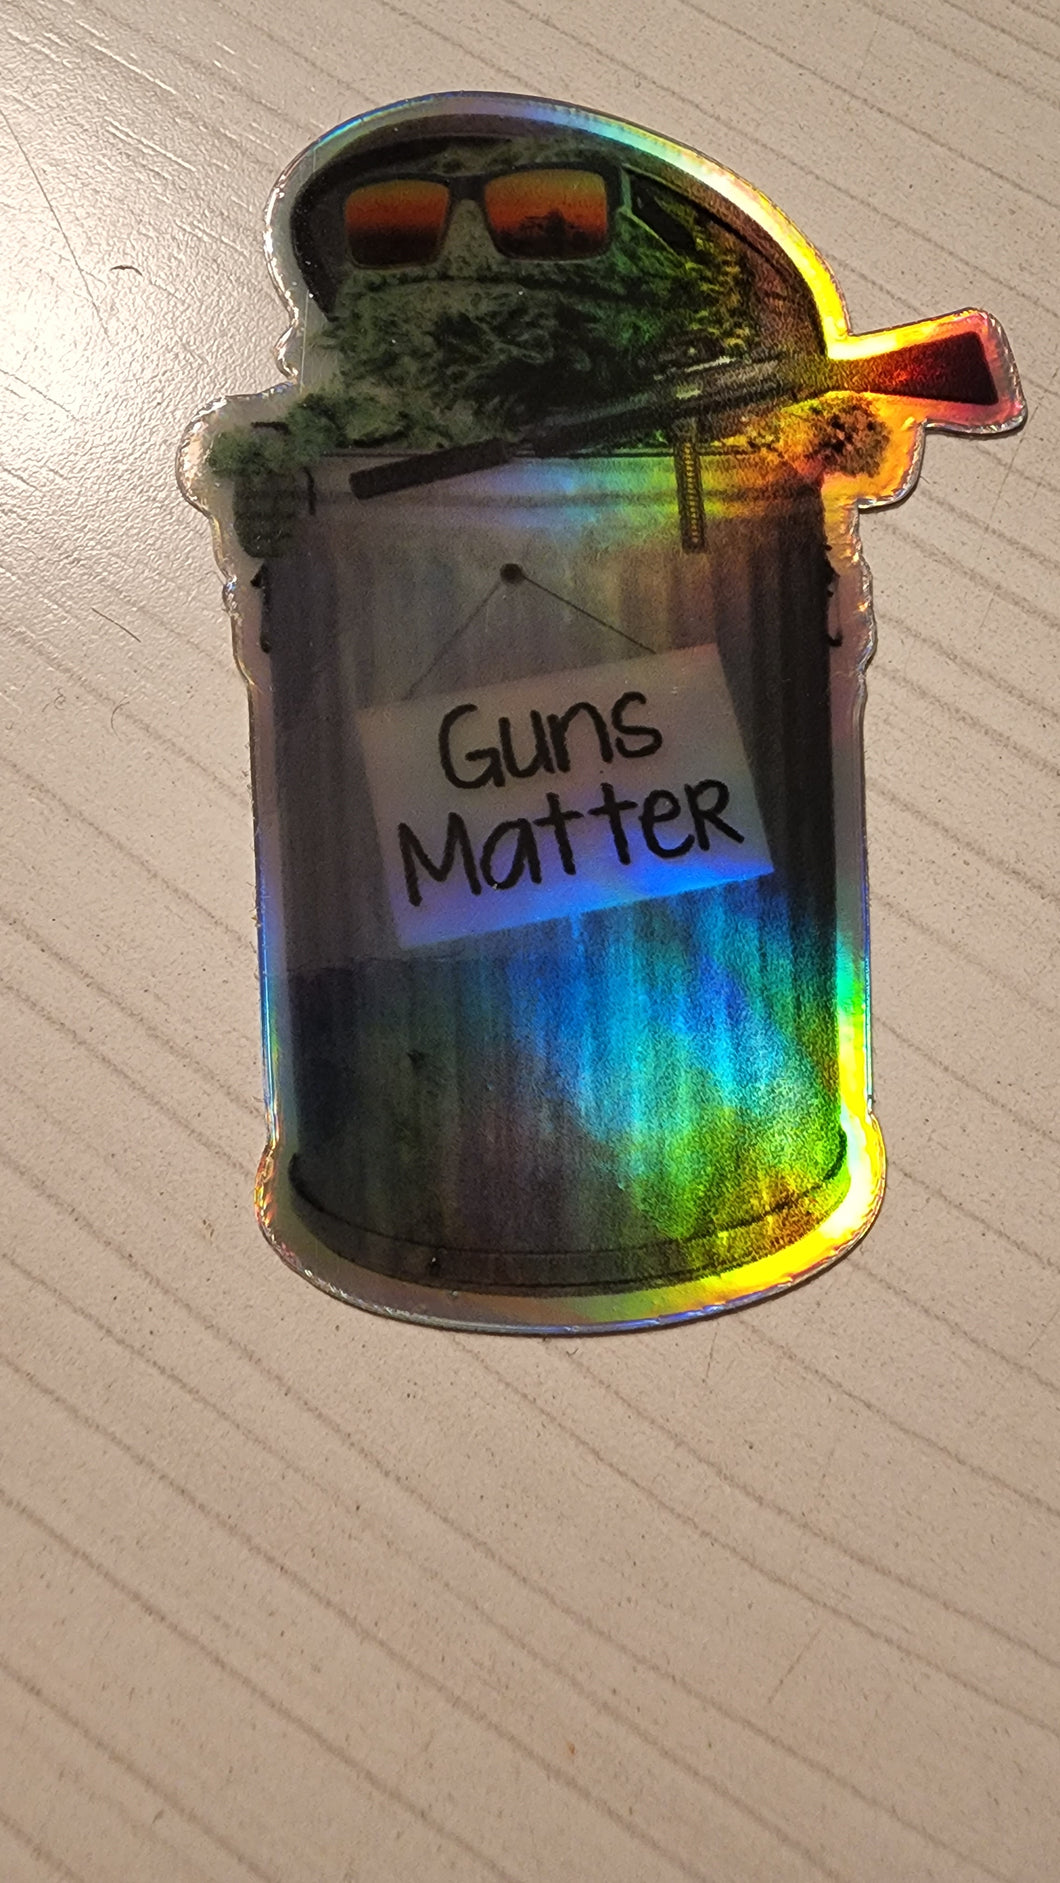 Oscar the Grouch Guns Matter Holographic Stickers